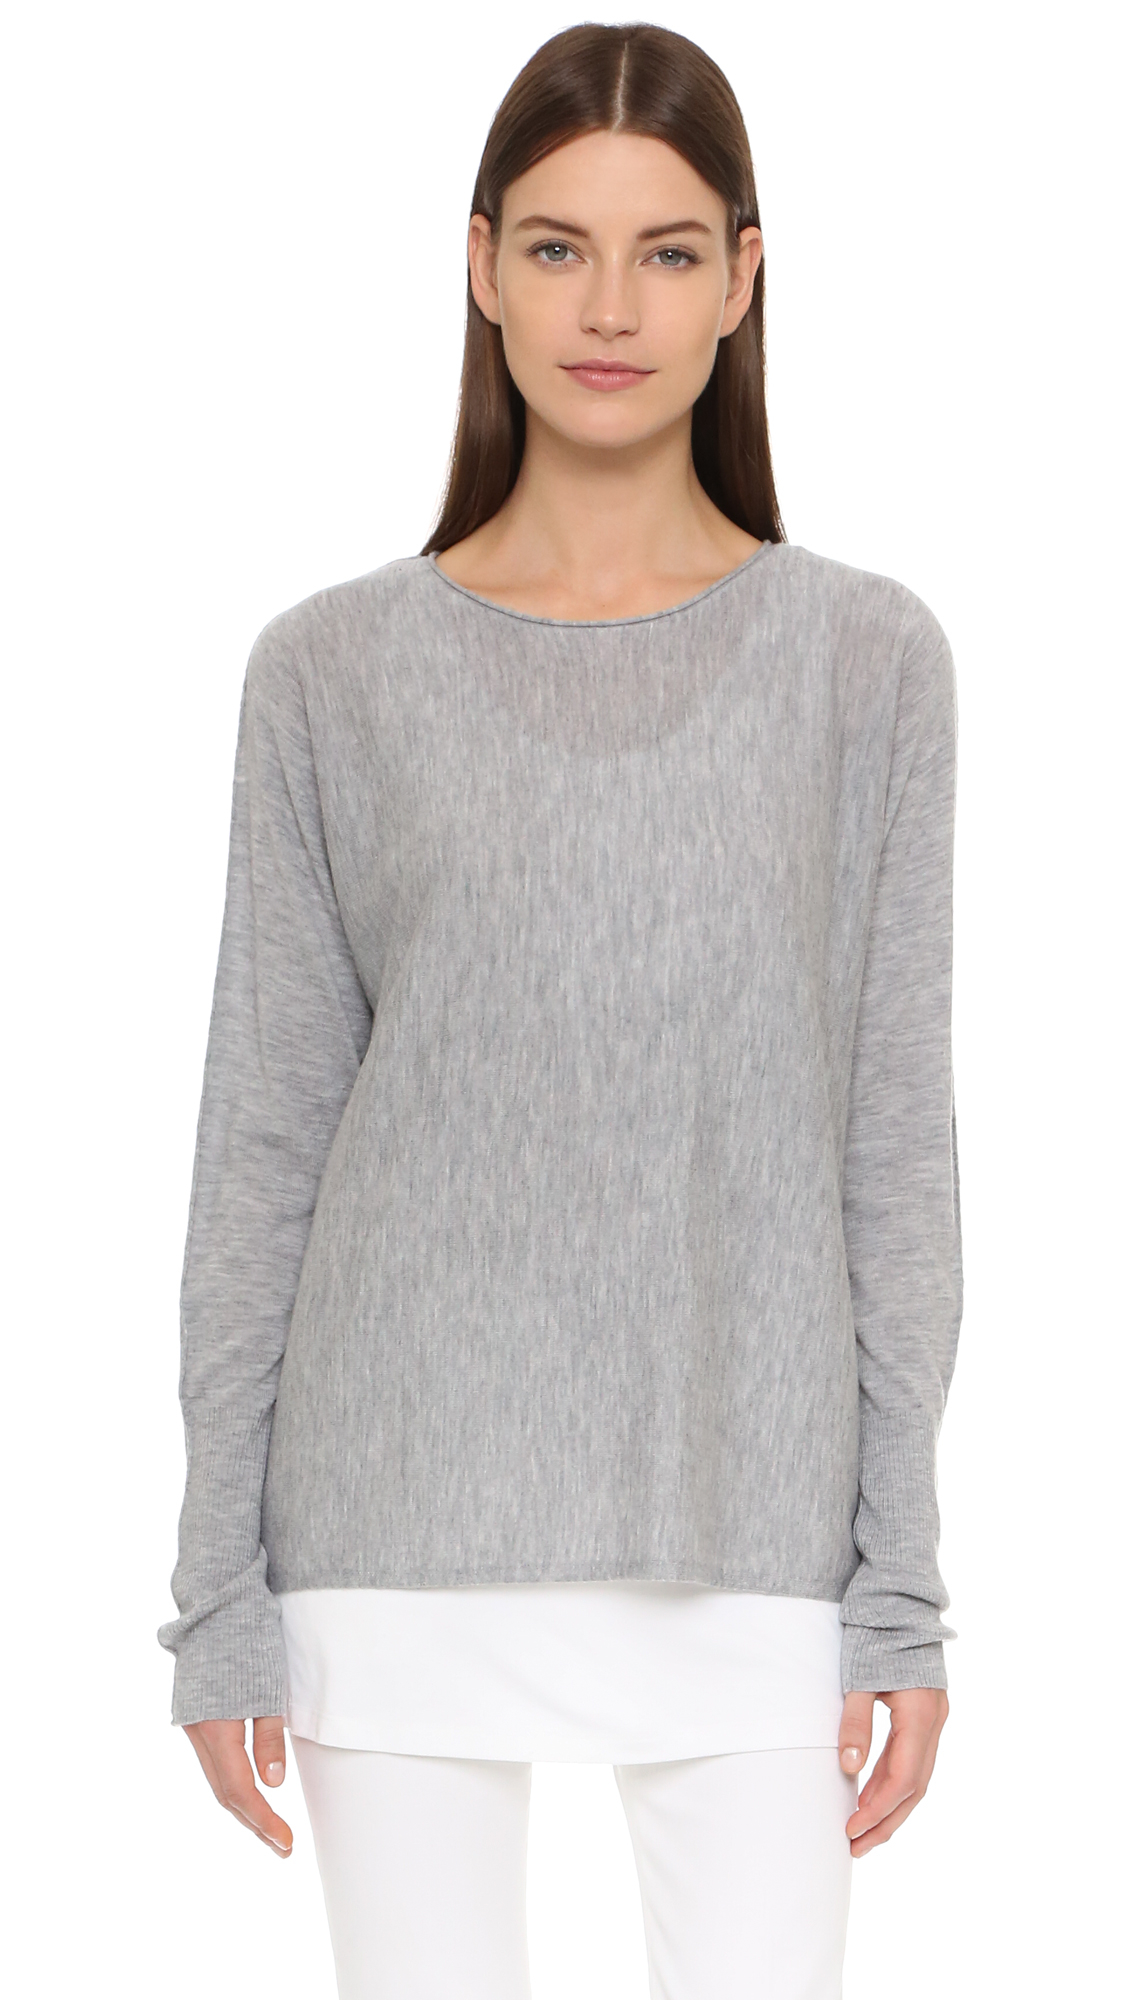 Lyst - Tess Giberson Cashmere Slouchy Sweater in Gray